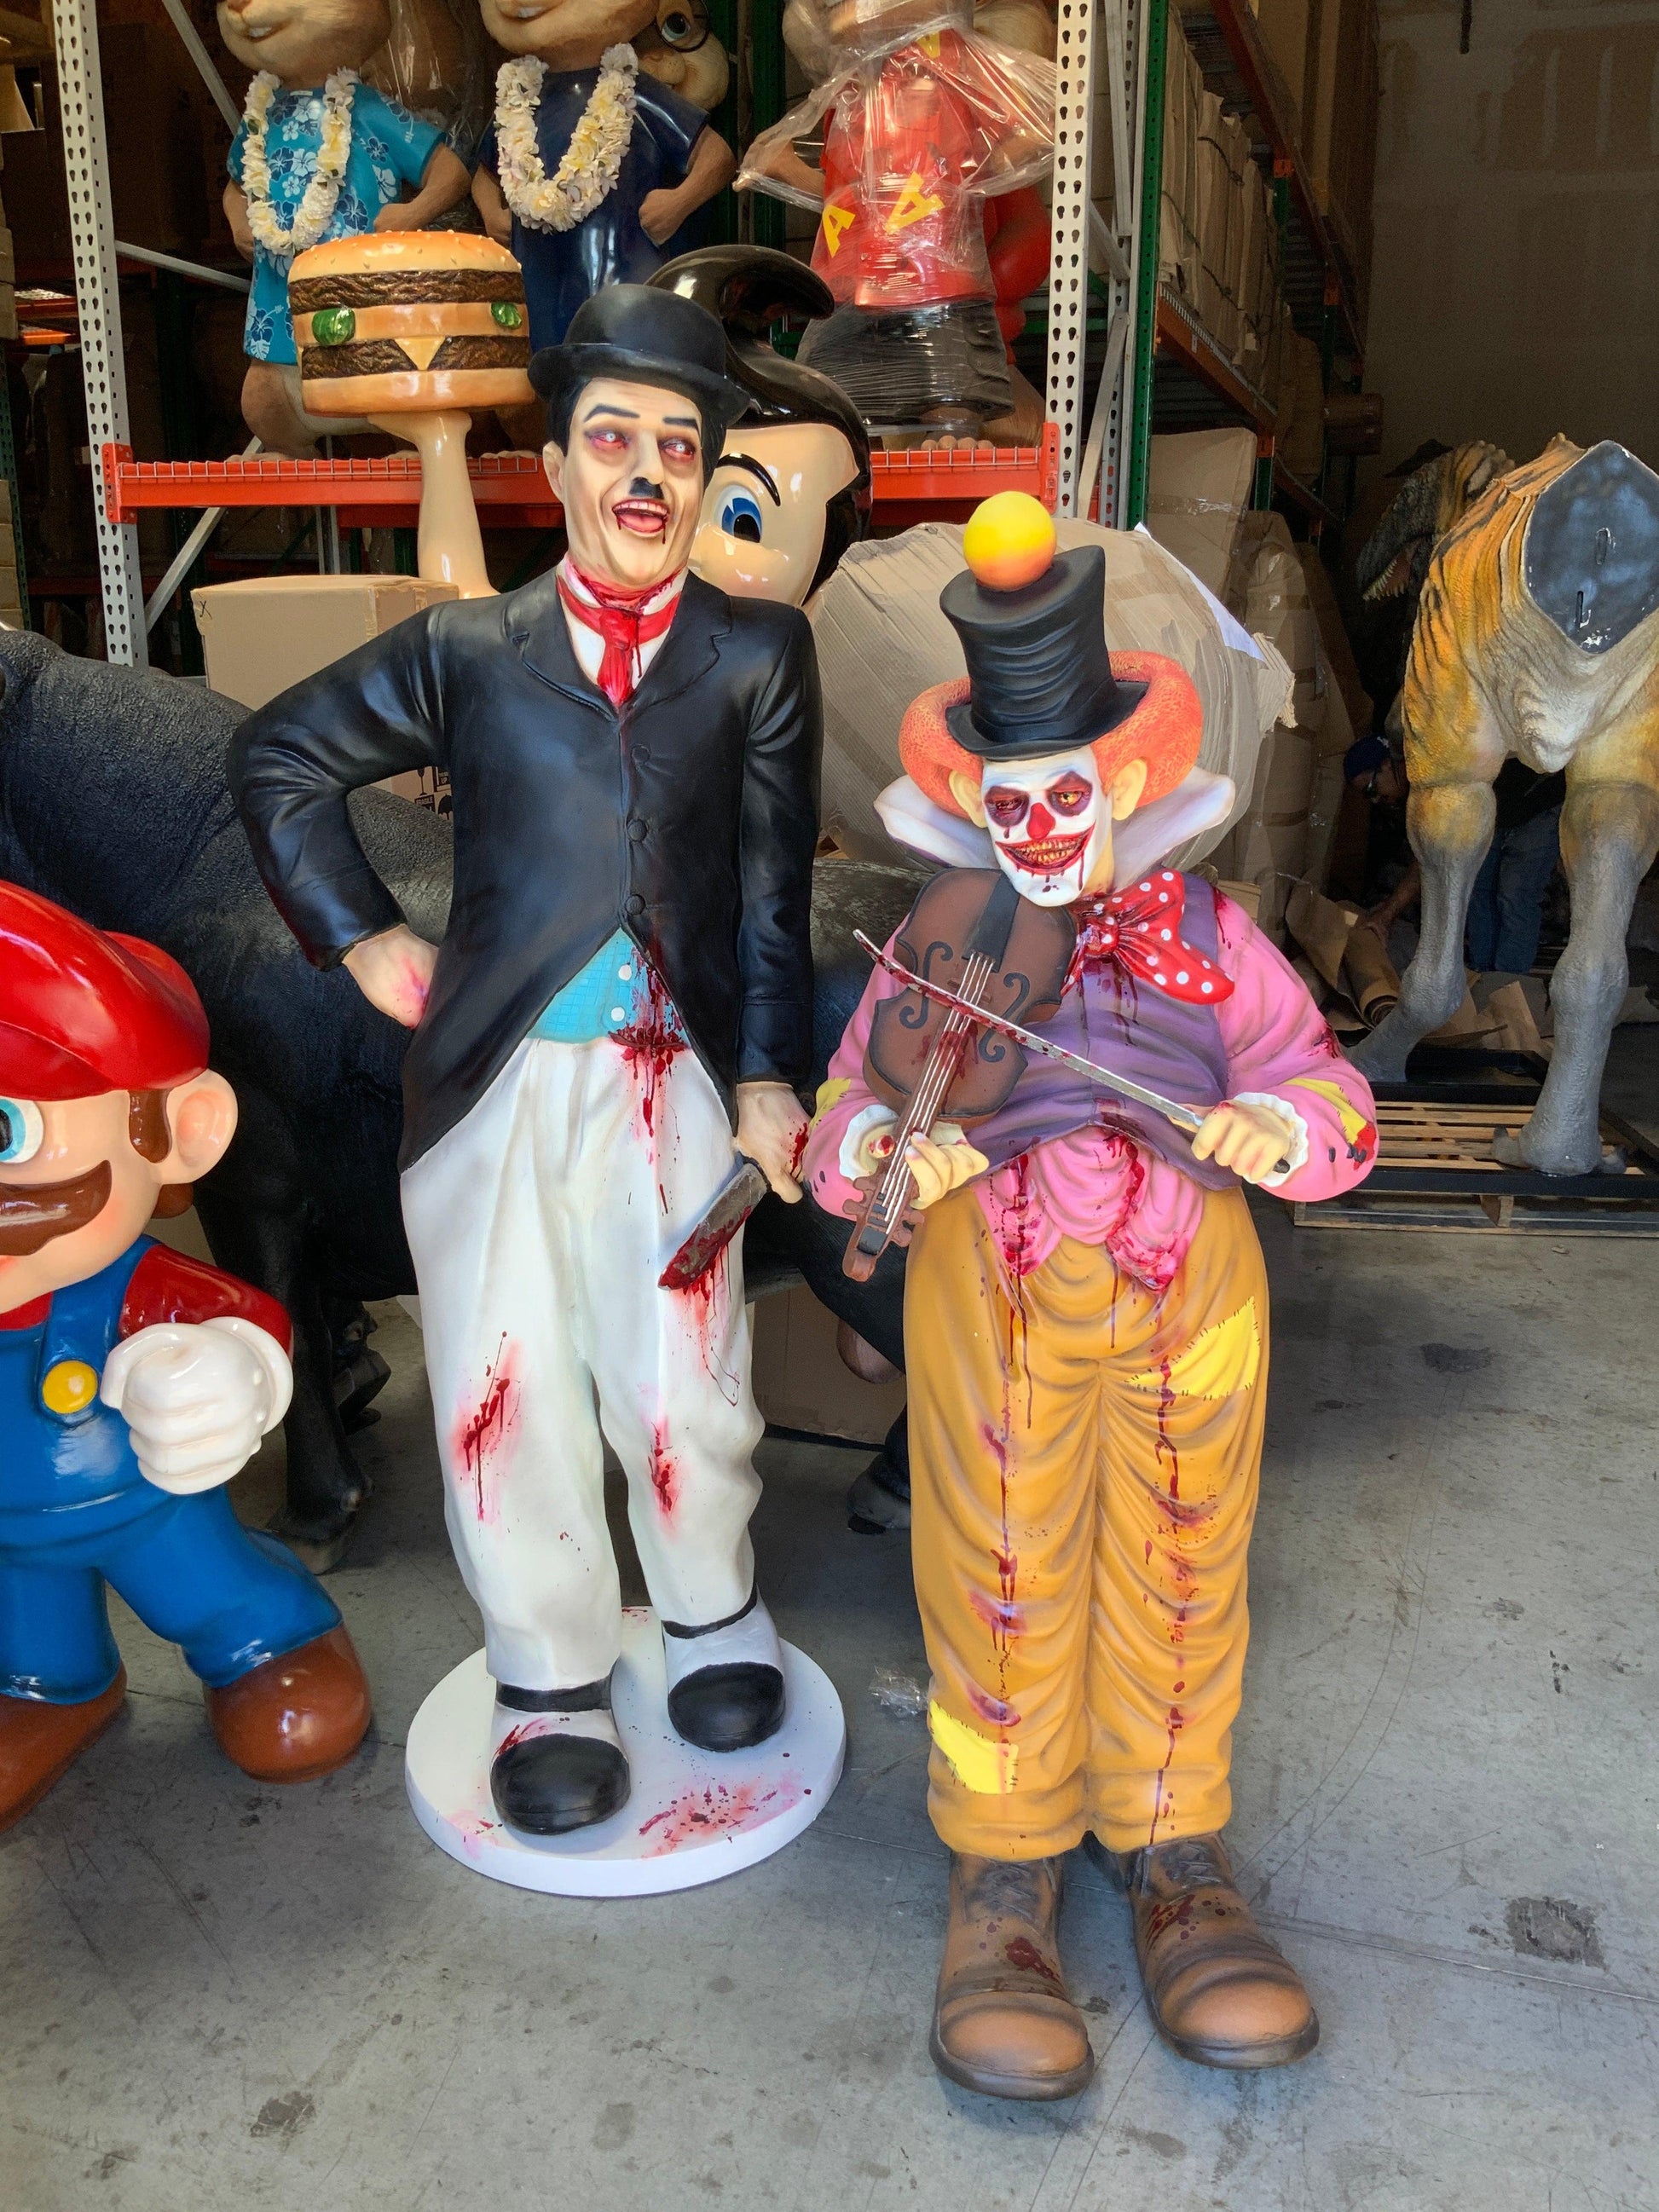 Scary Clown Playing Violin Life Size Statue - LM Treasures Prop Rentals 